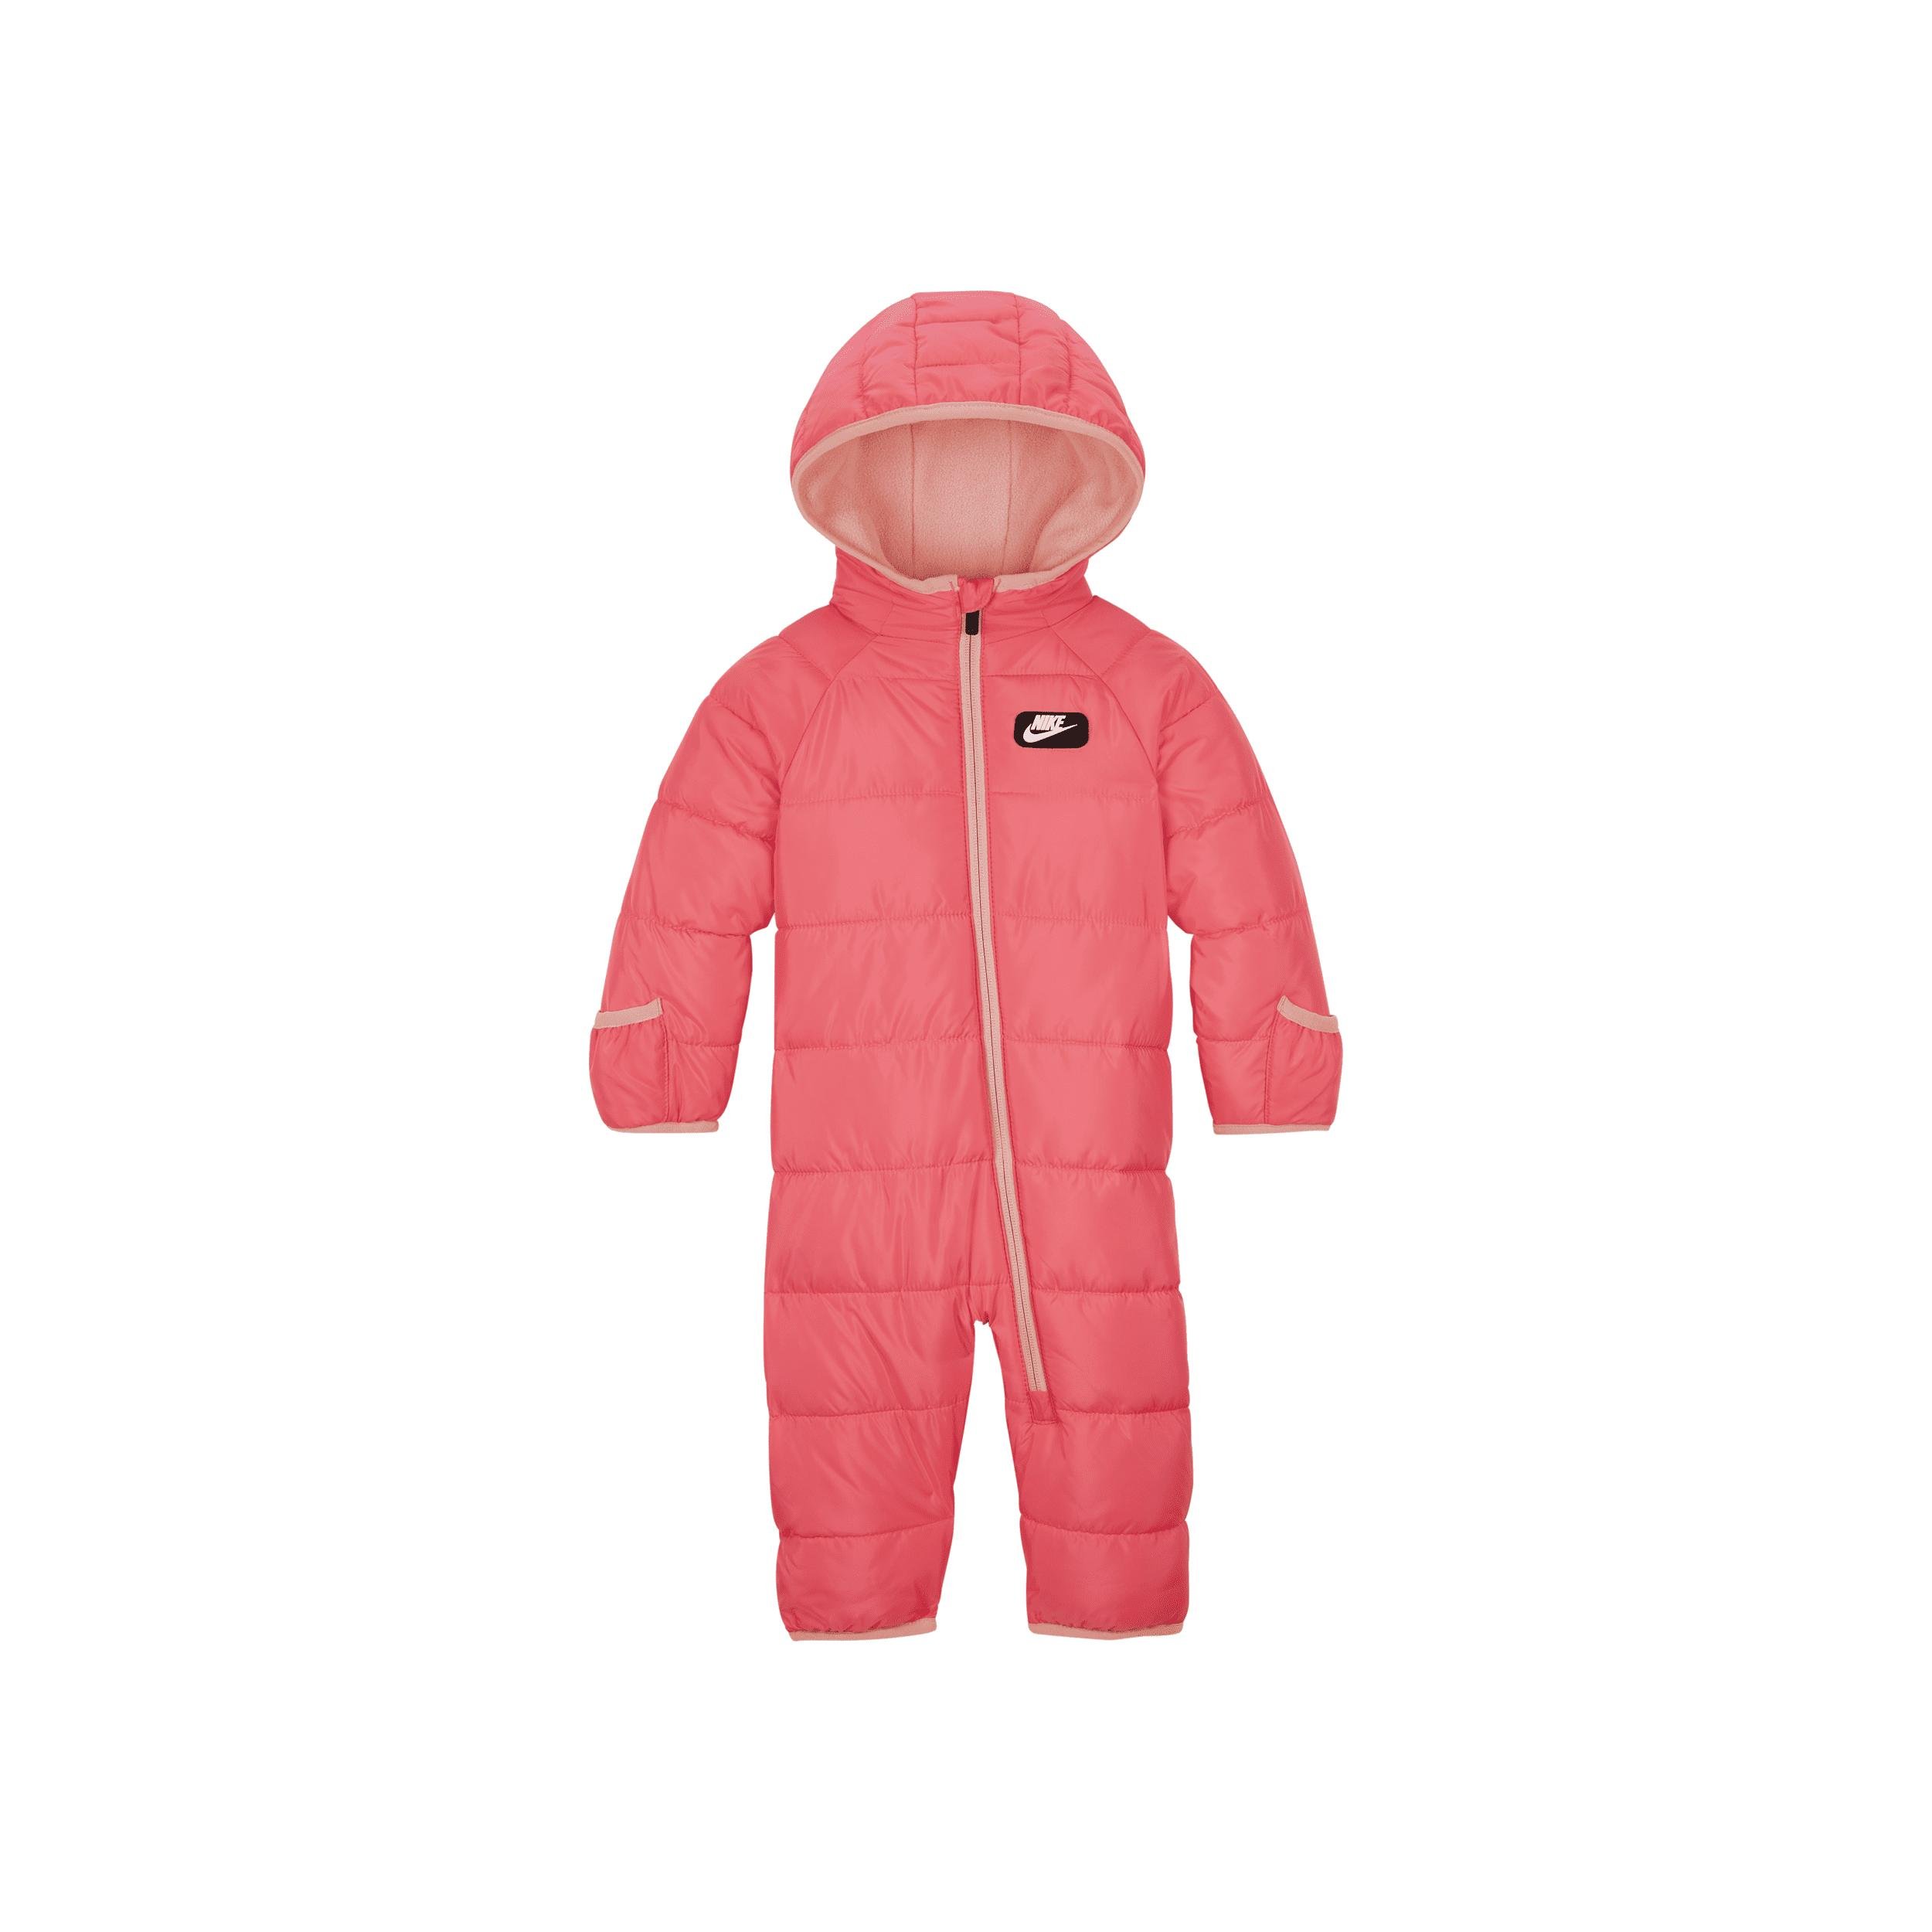 Nike Baby (12-24M) Puffer Snowsuit by NIKE